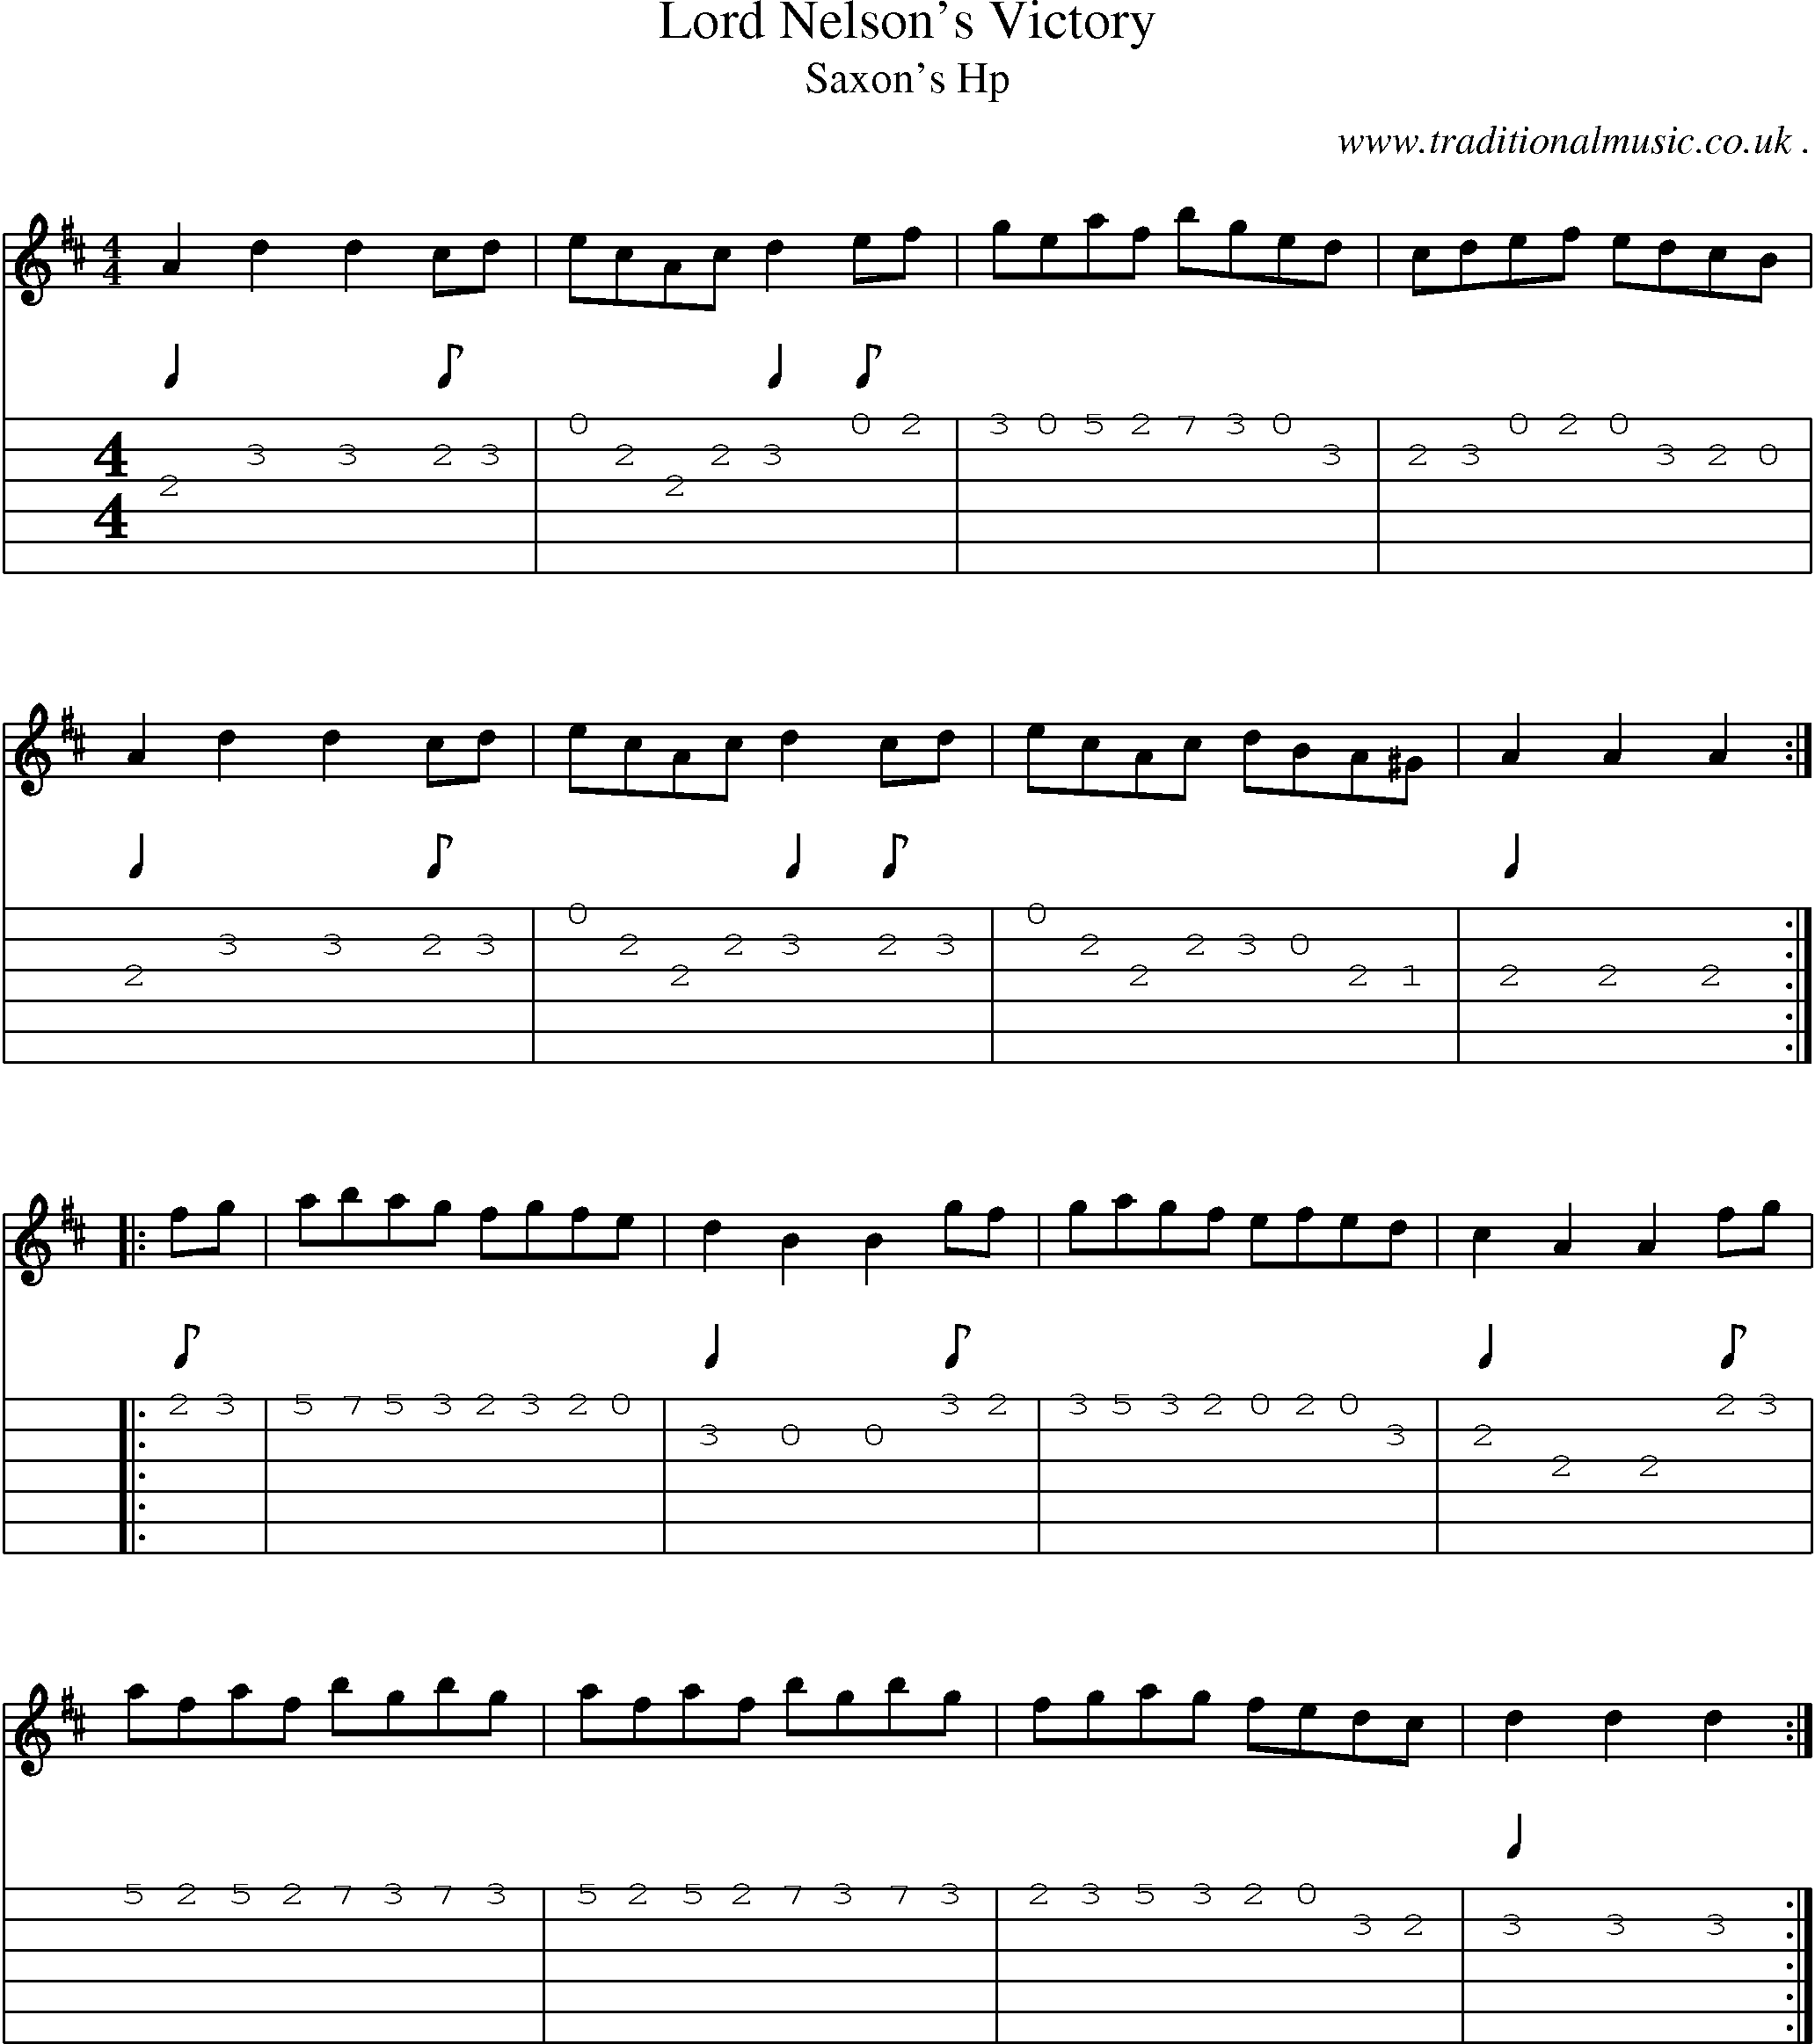 Sheet-Music and Guitar Tabs for Lord Nelsons Victory